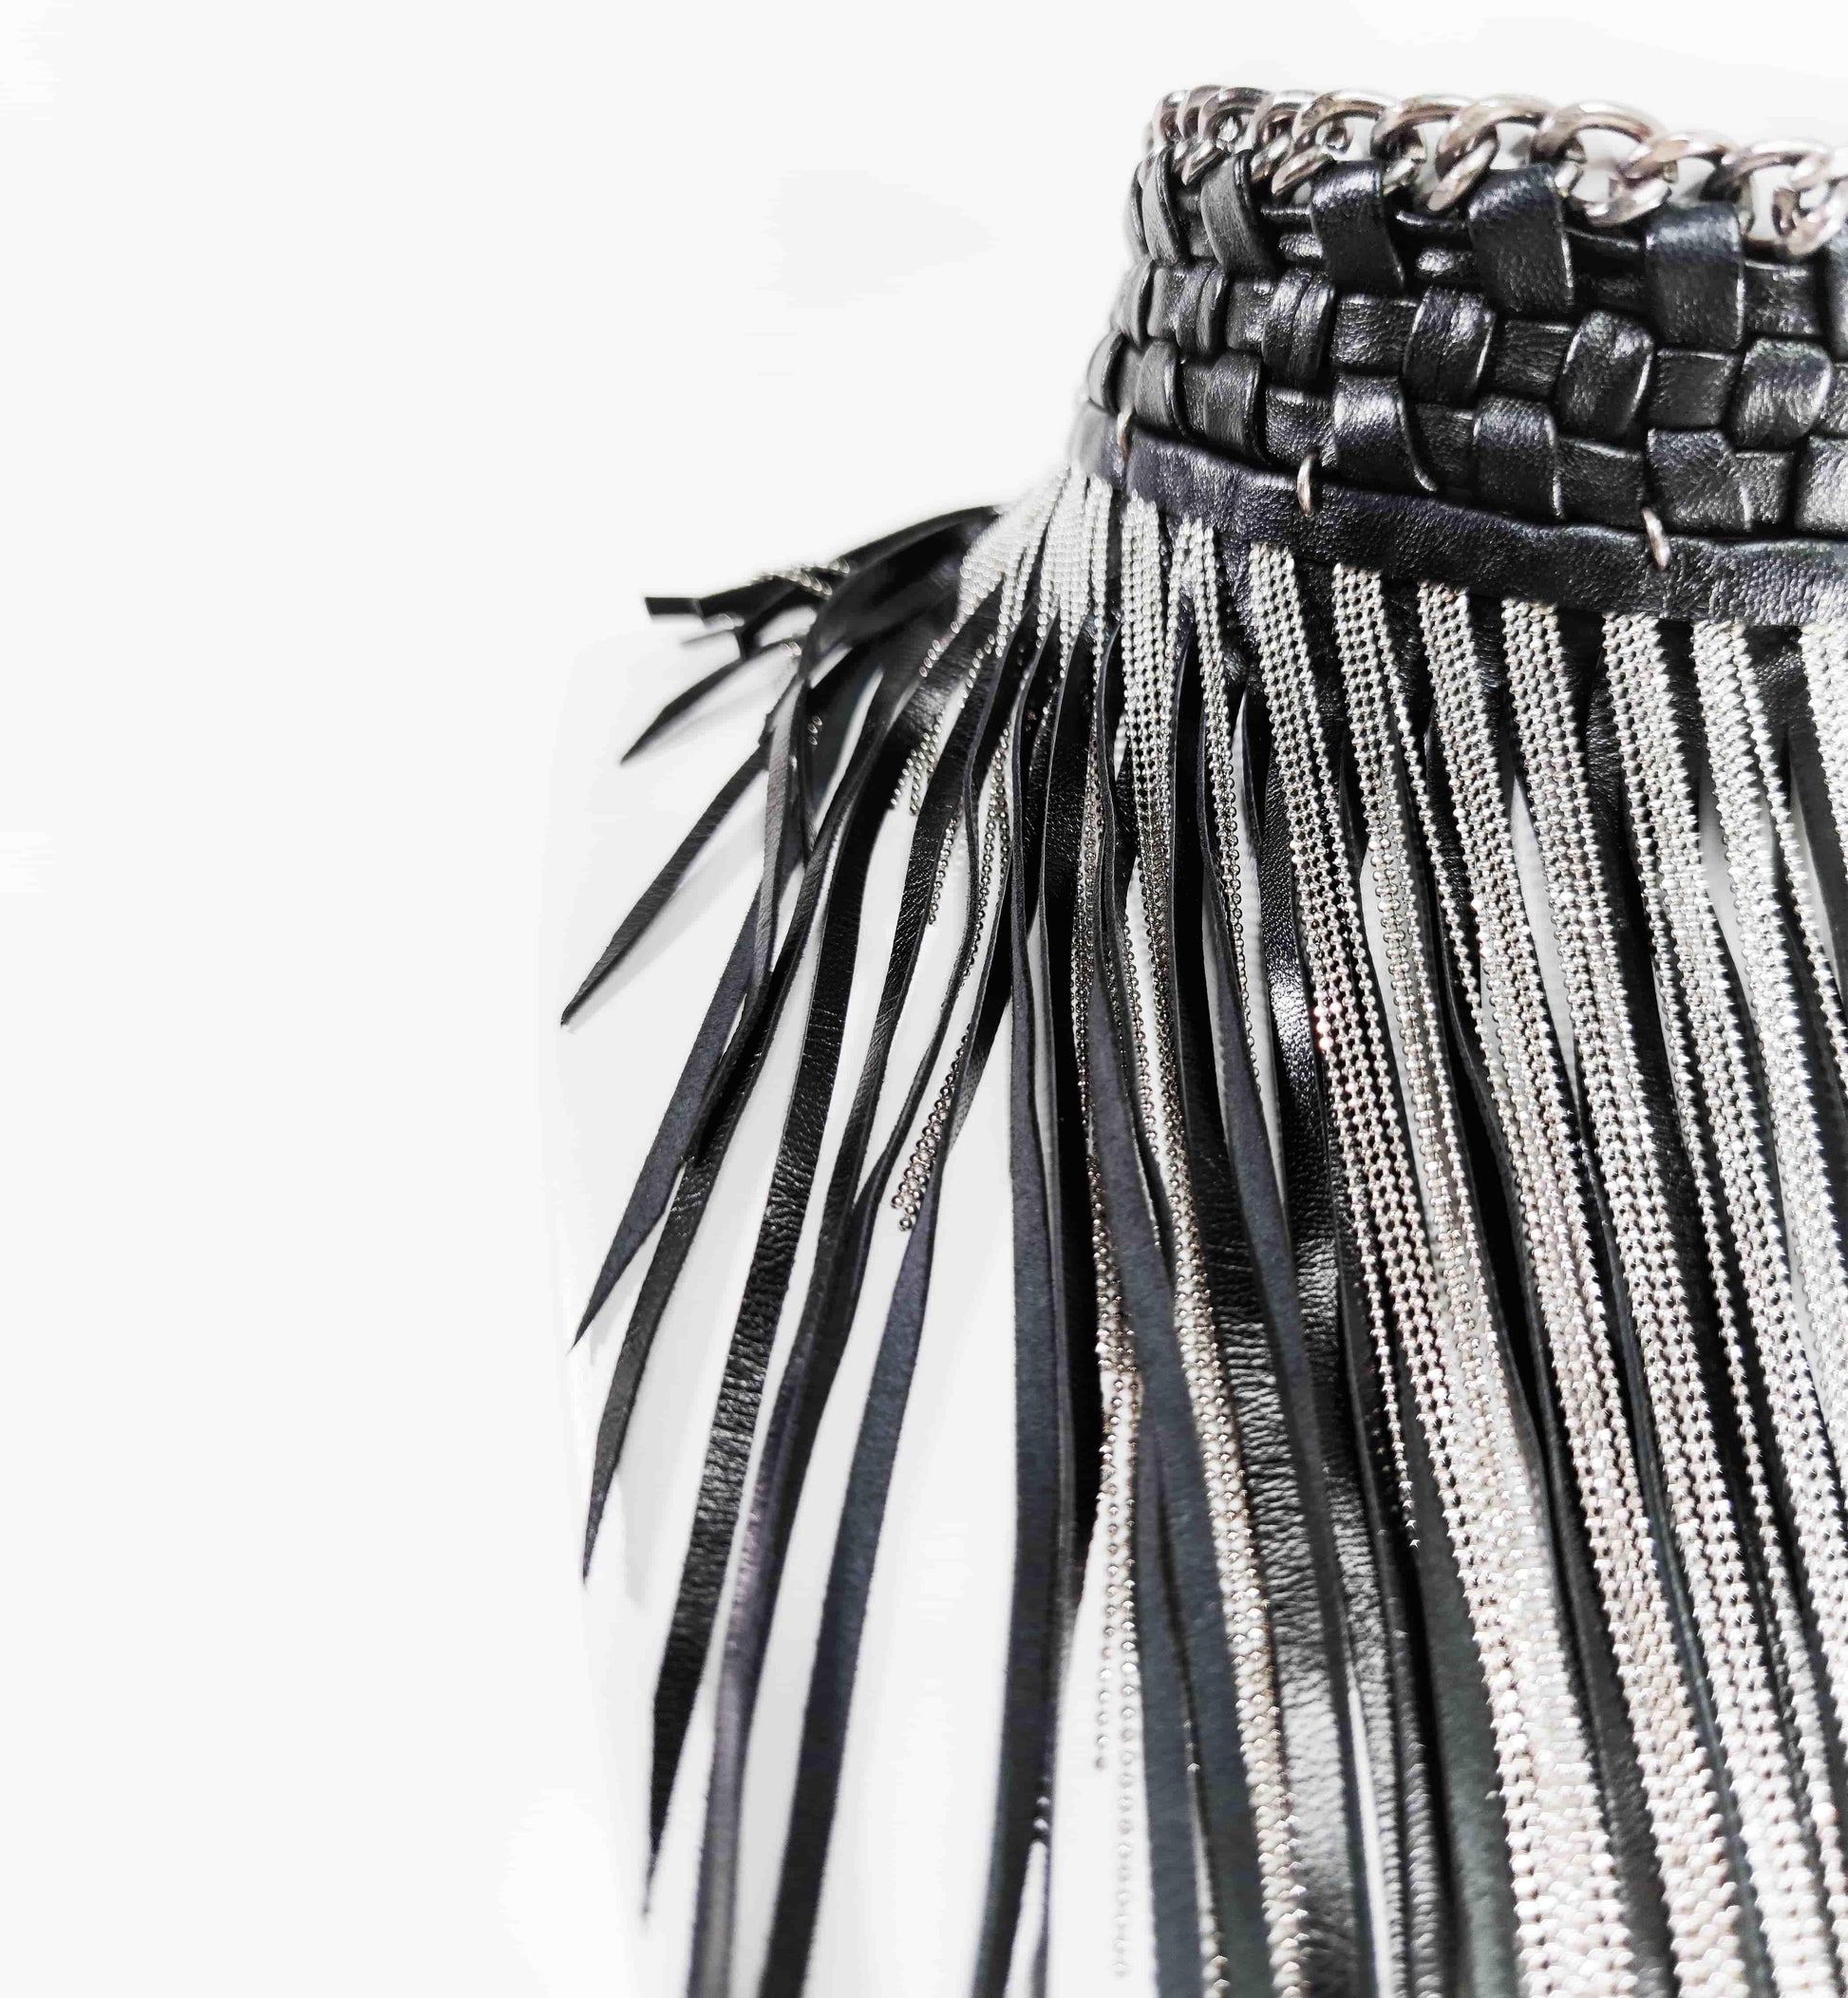 Exquisite detail of Axinia Long Braided Leather Chocker with Leather Fringe and Chains showcasing the fine craftsmanship and elegant design characteristic of Axinia Collection 's luxury collection.